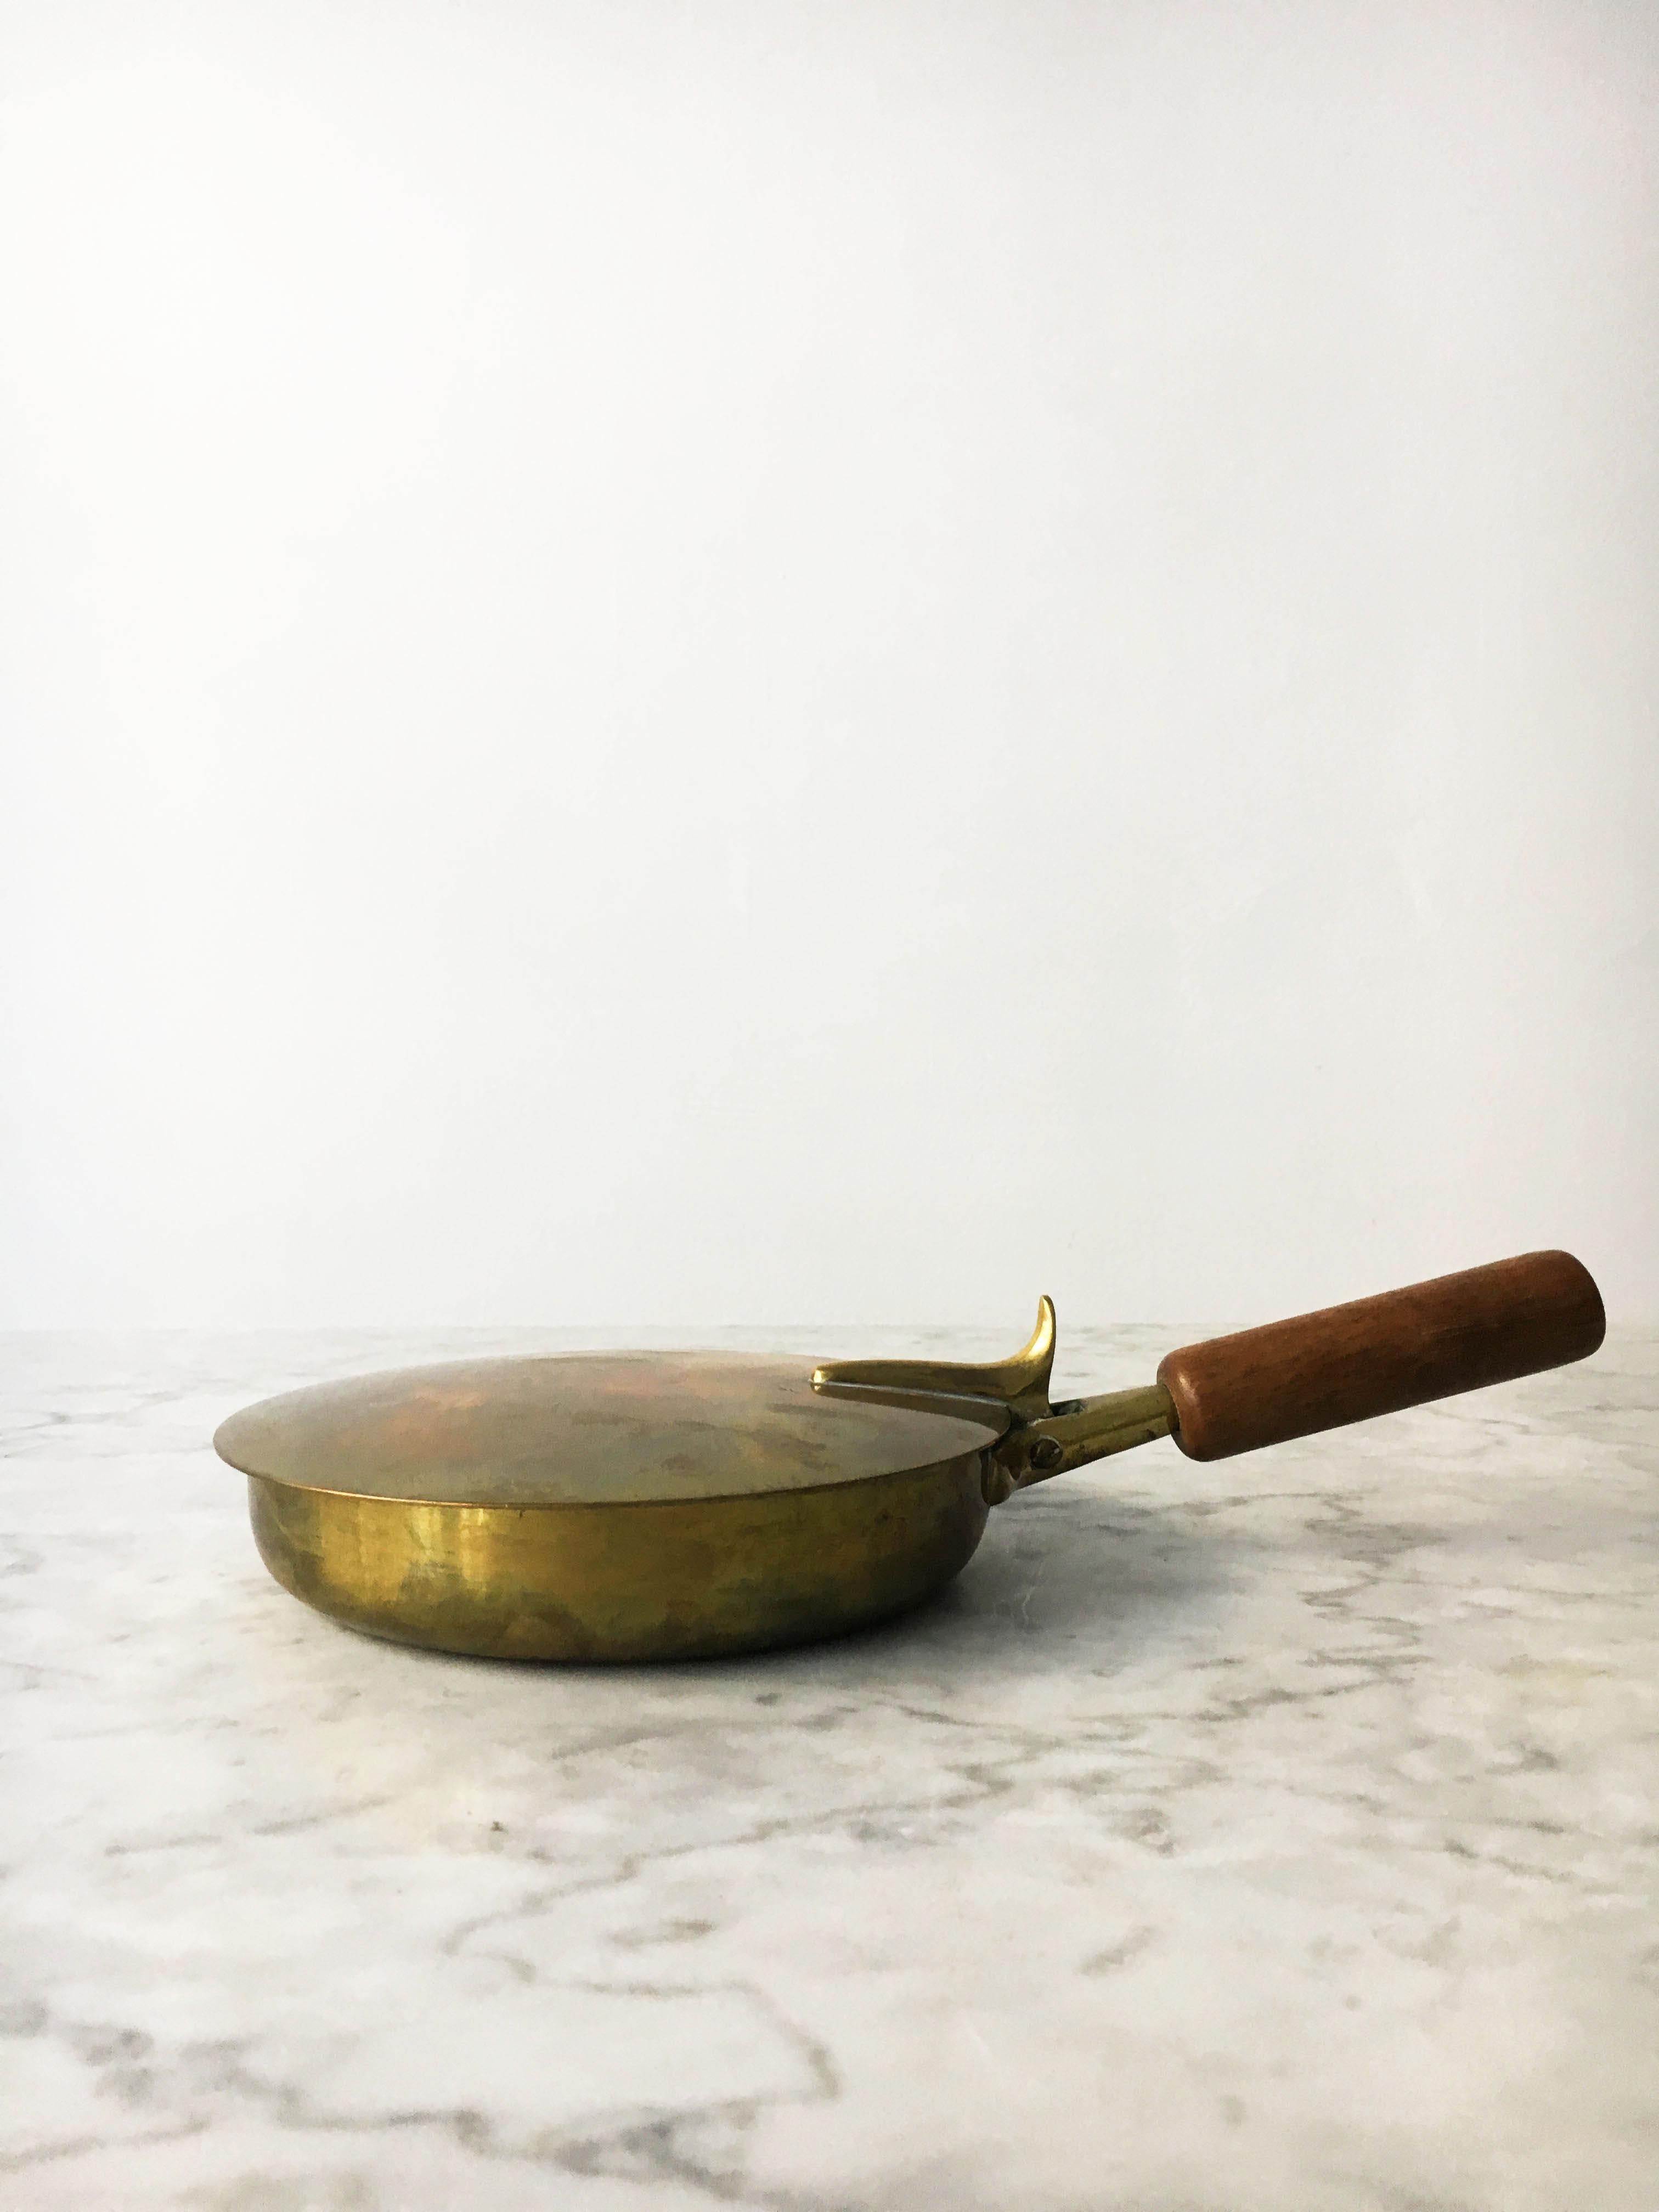 Vintage ashtray silent butler Model 3709 designed and made at the Werkstätte Carl Auböck. Patinated brass with a solid walnut handle. In excellent condition with just the right amount of lovely gently aged patina. Signed Auböck, Made in Austria.